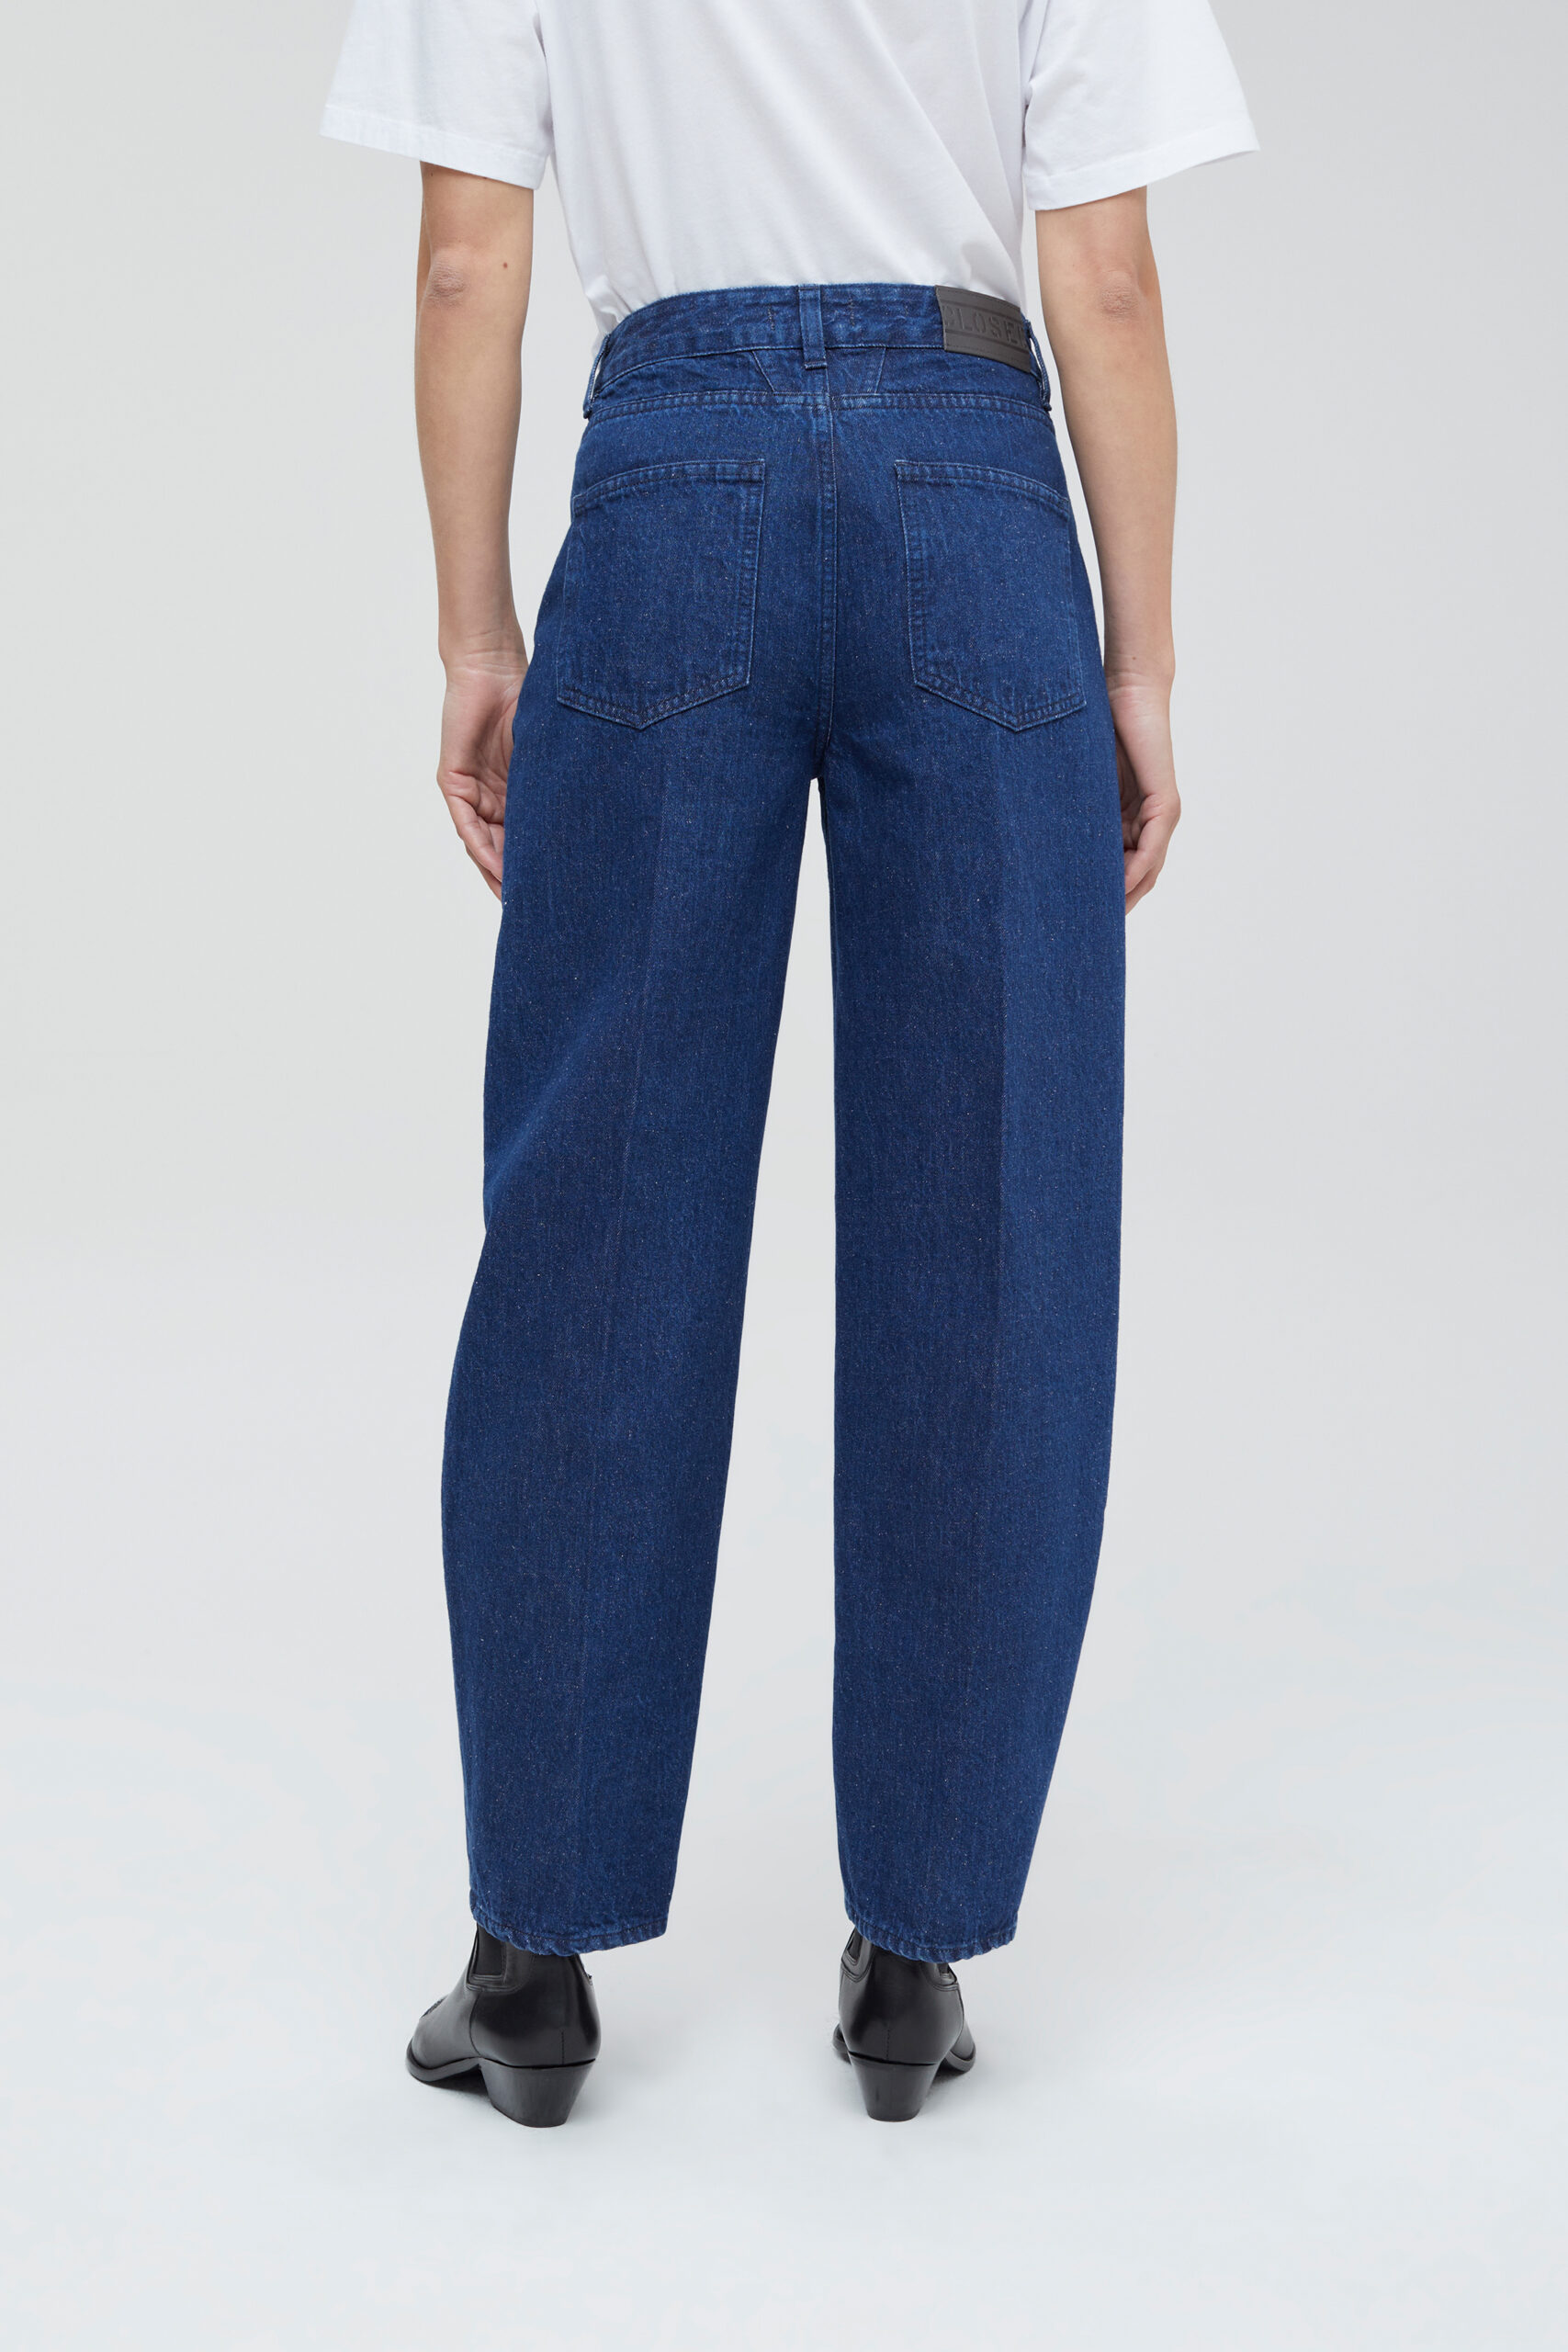 Jeans, Fayna, Closed, C91389